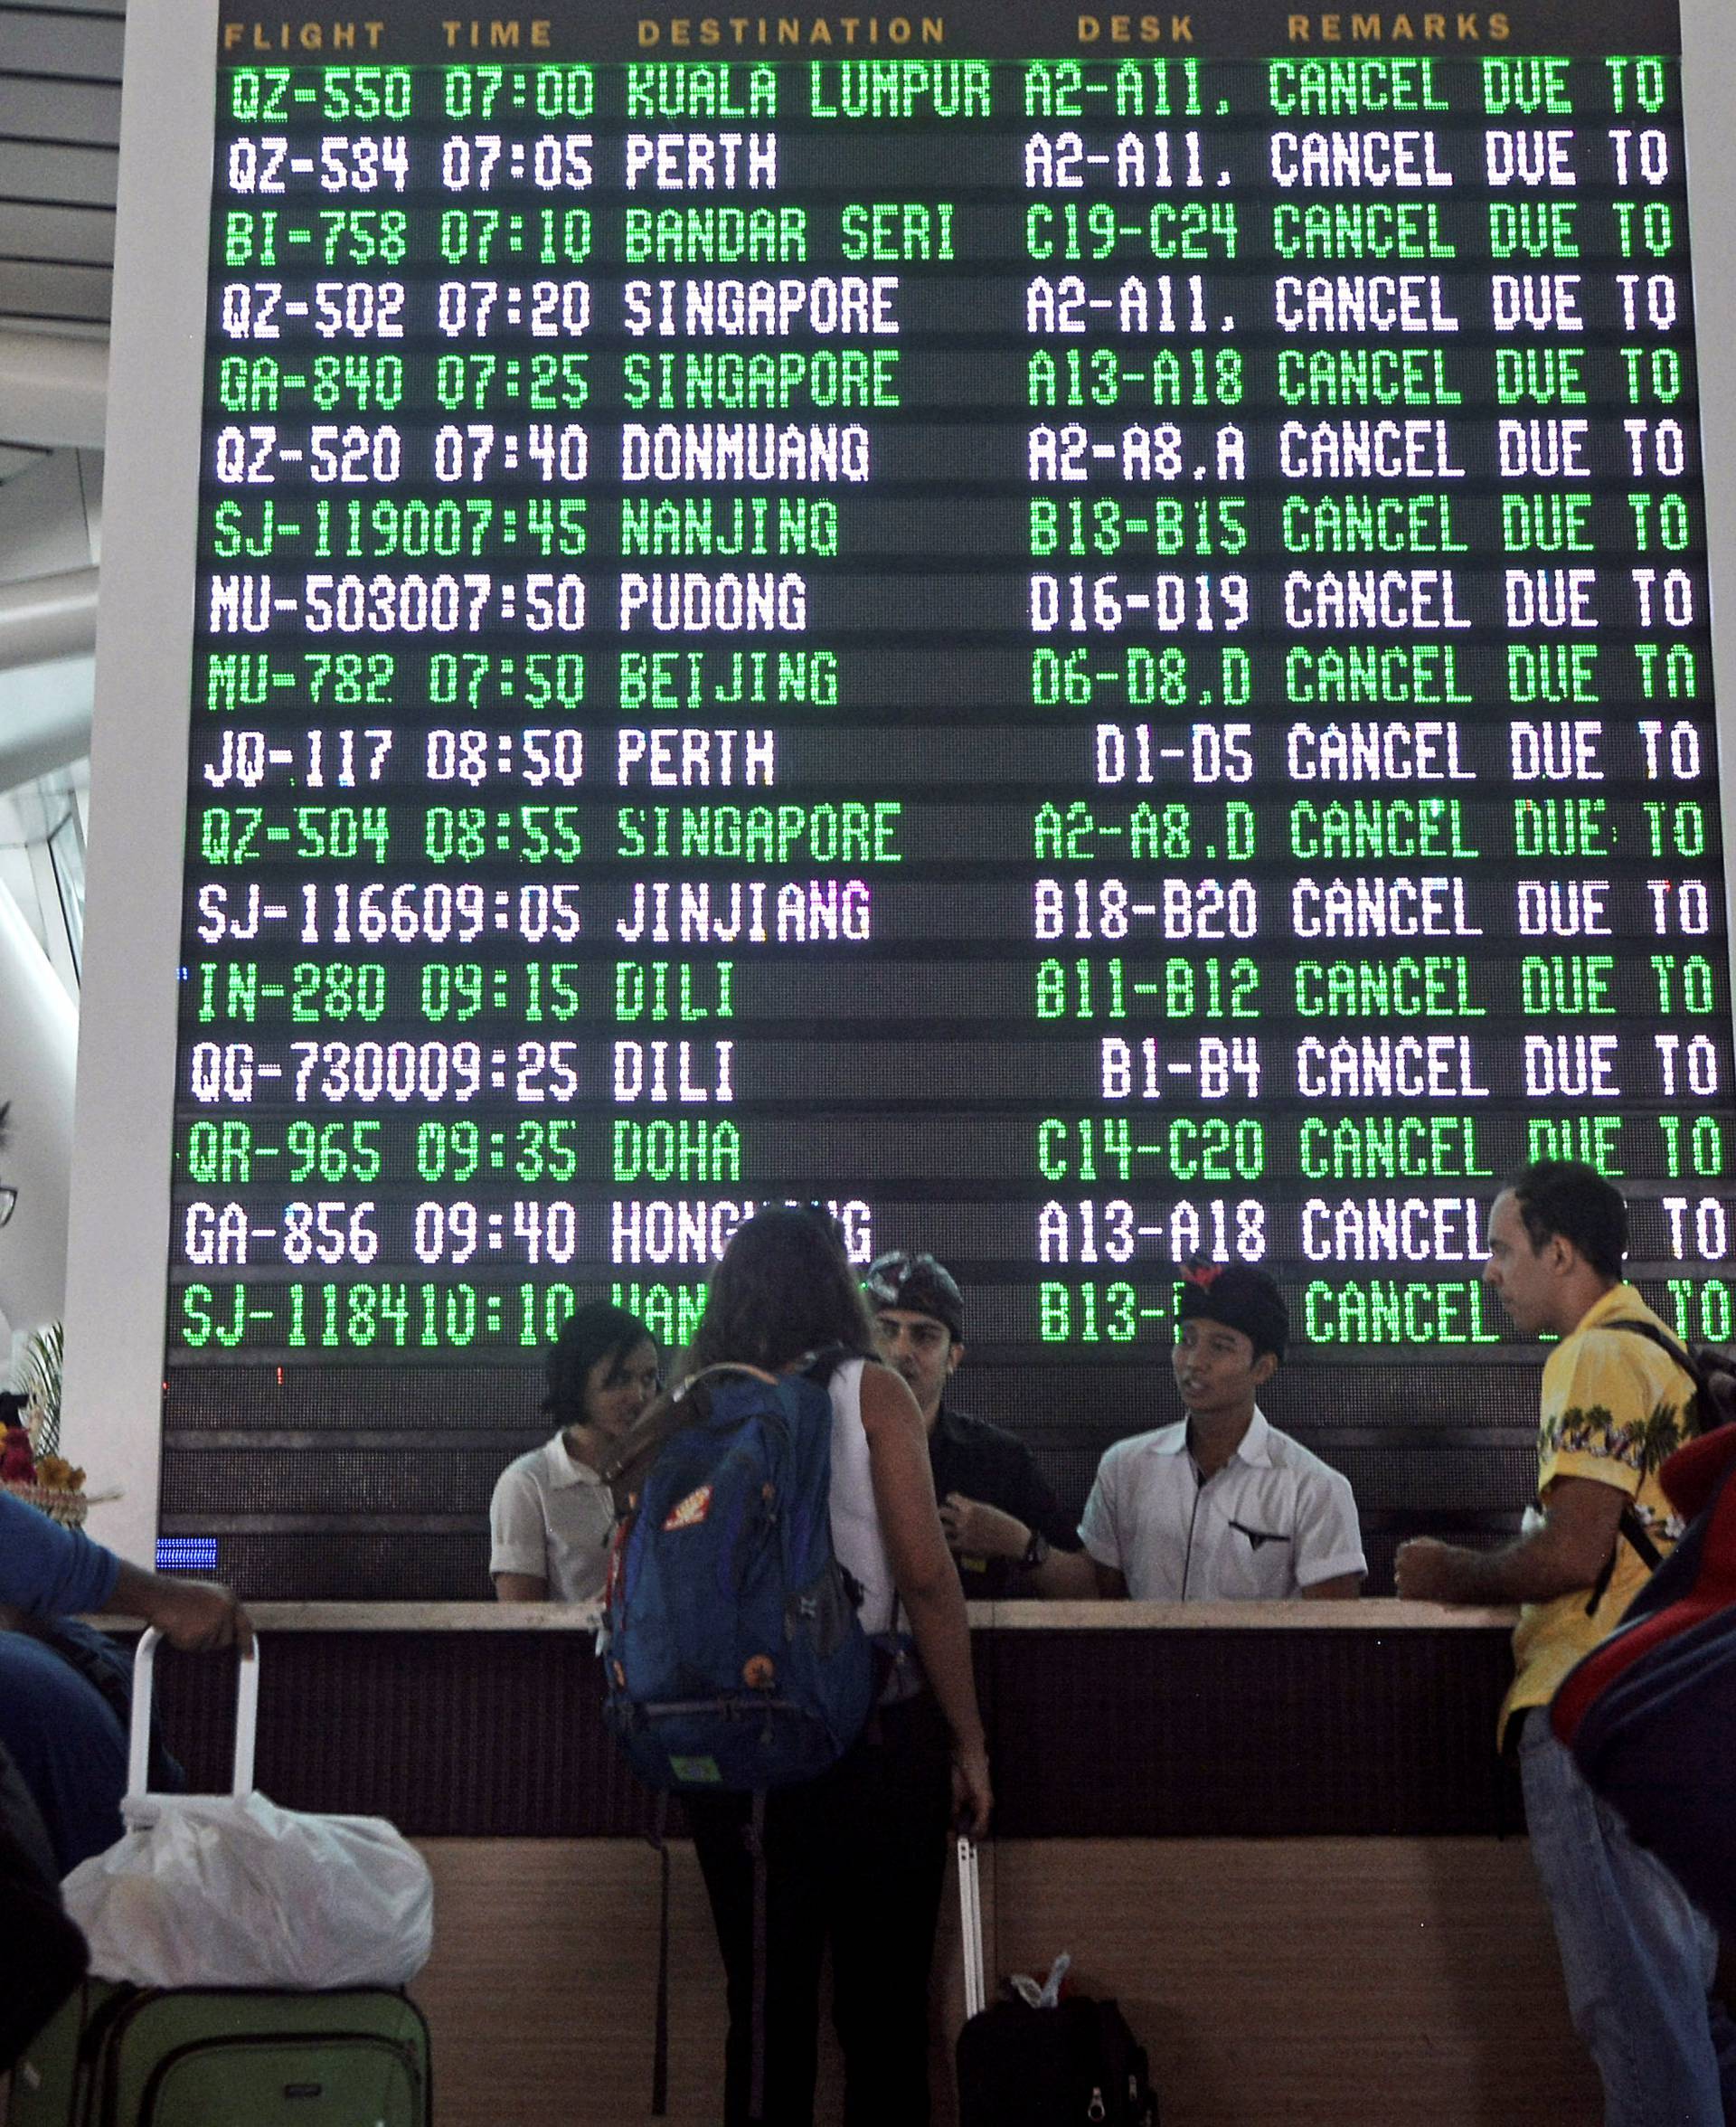 Passengers ask staff about their flights near the flight screen after Ngurah Rai airport closed their operation due to eruption of Mount Agung in Bali resort island